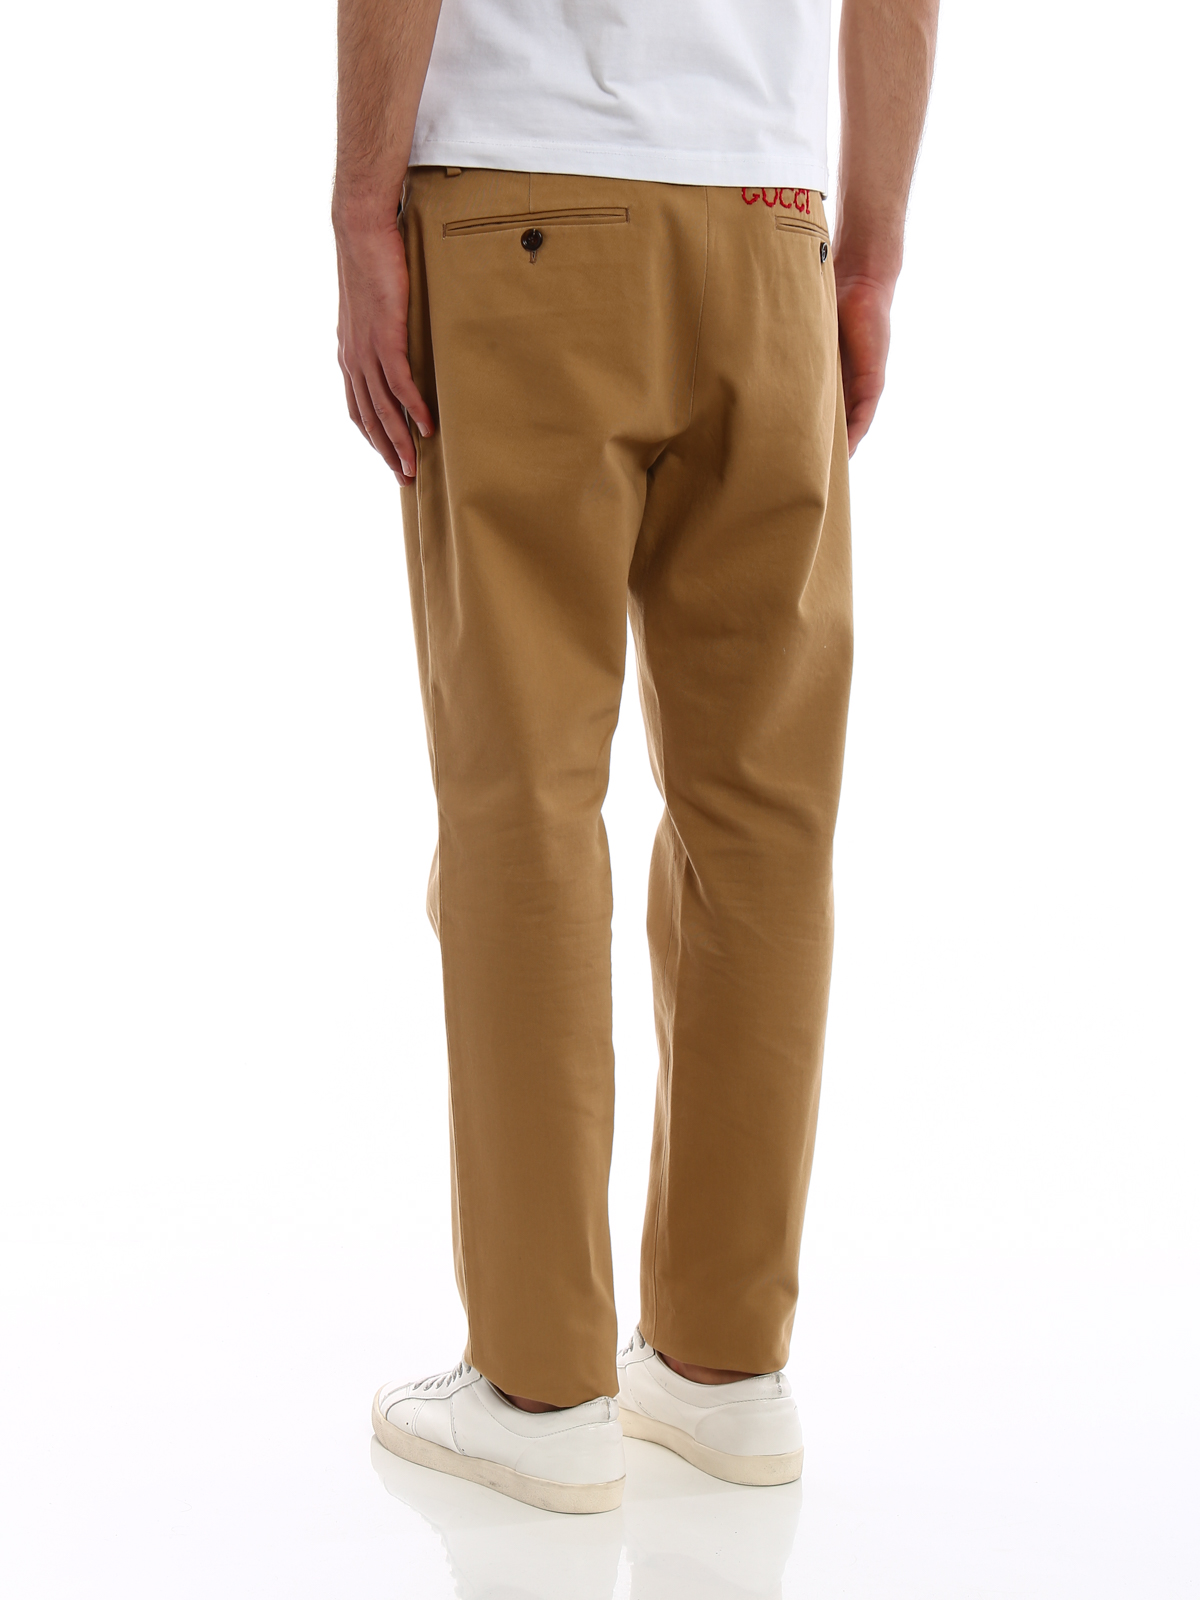 trousers Gucci - Beige cotton drill trousers - 519546Z396H9813